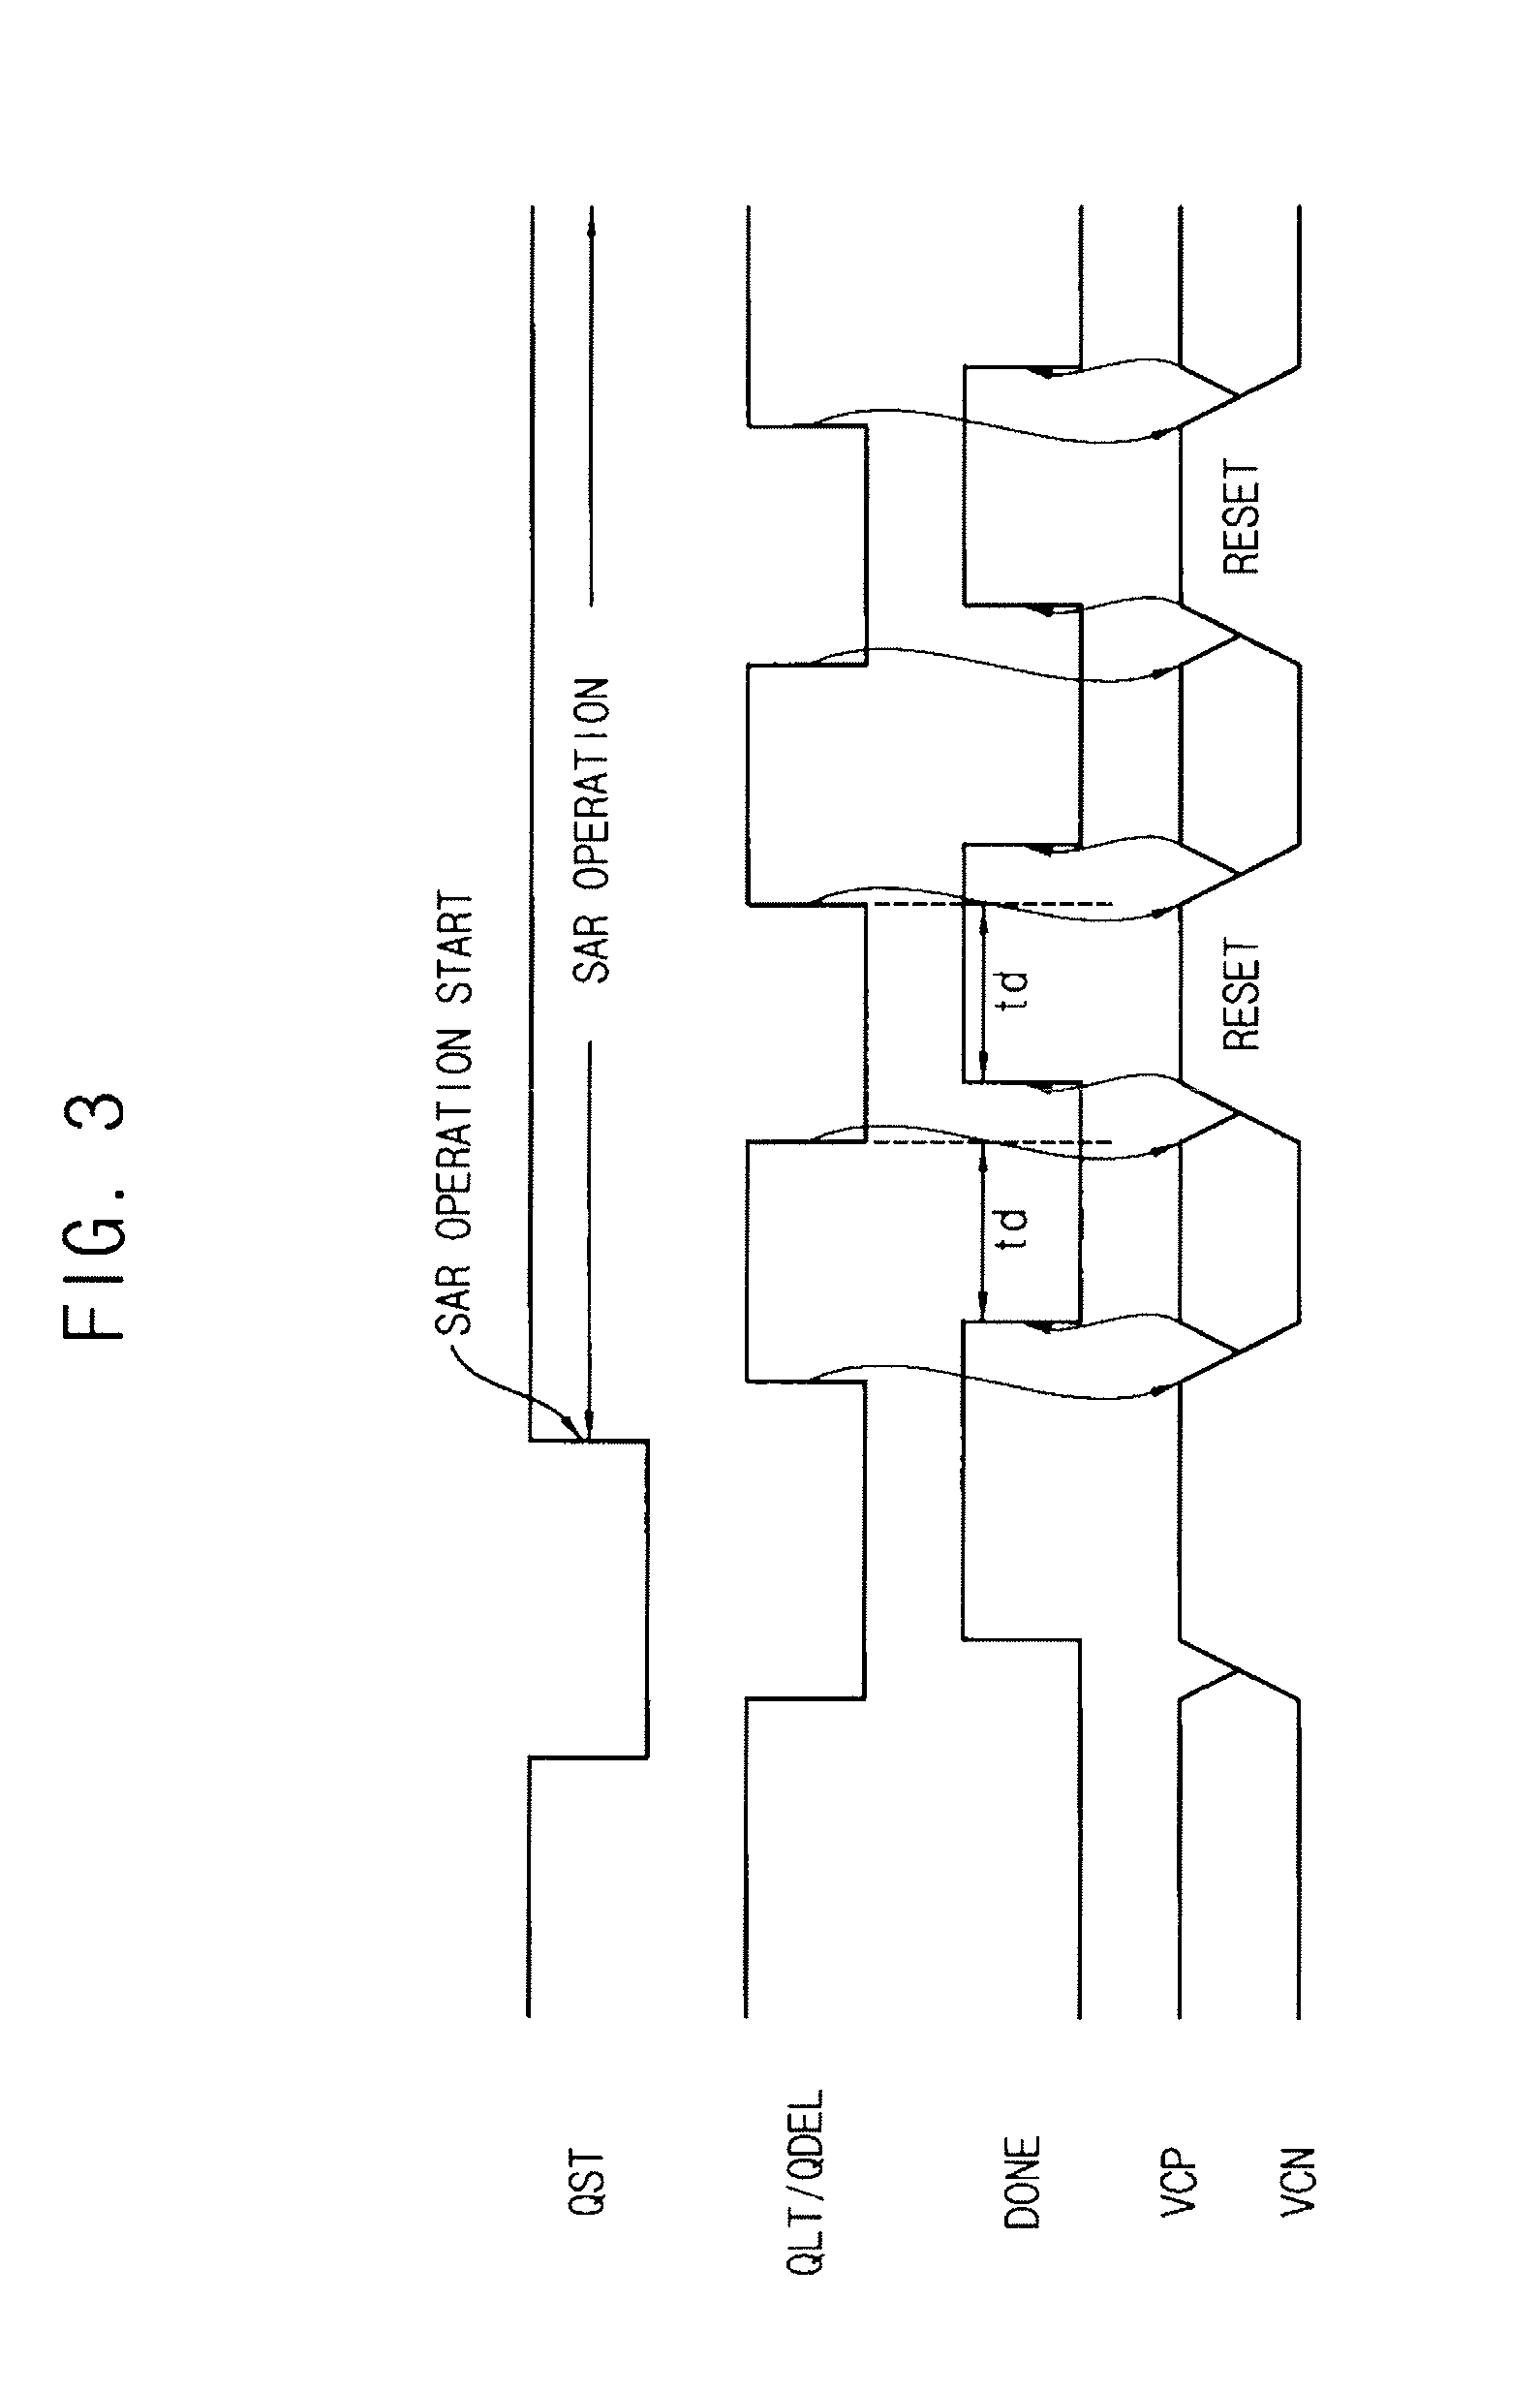 Apparatus and methods for converting analog signal to n-bit digital data